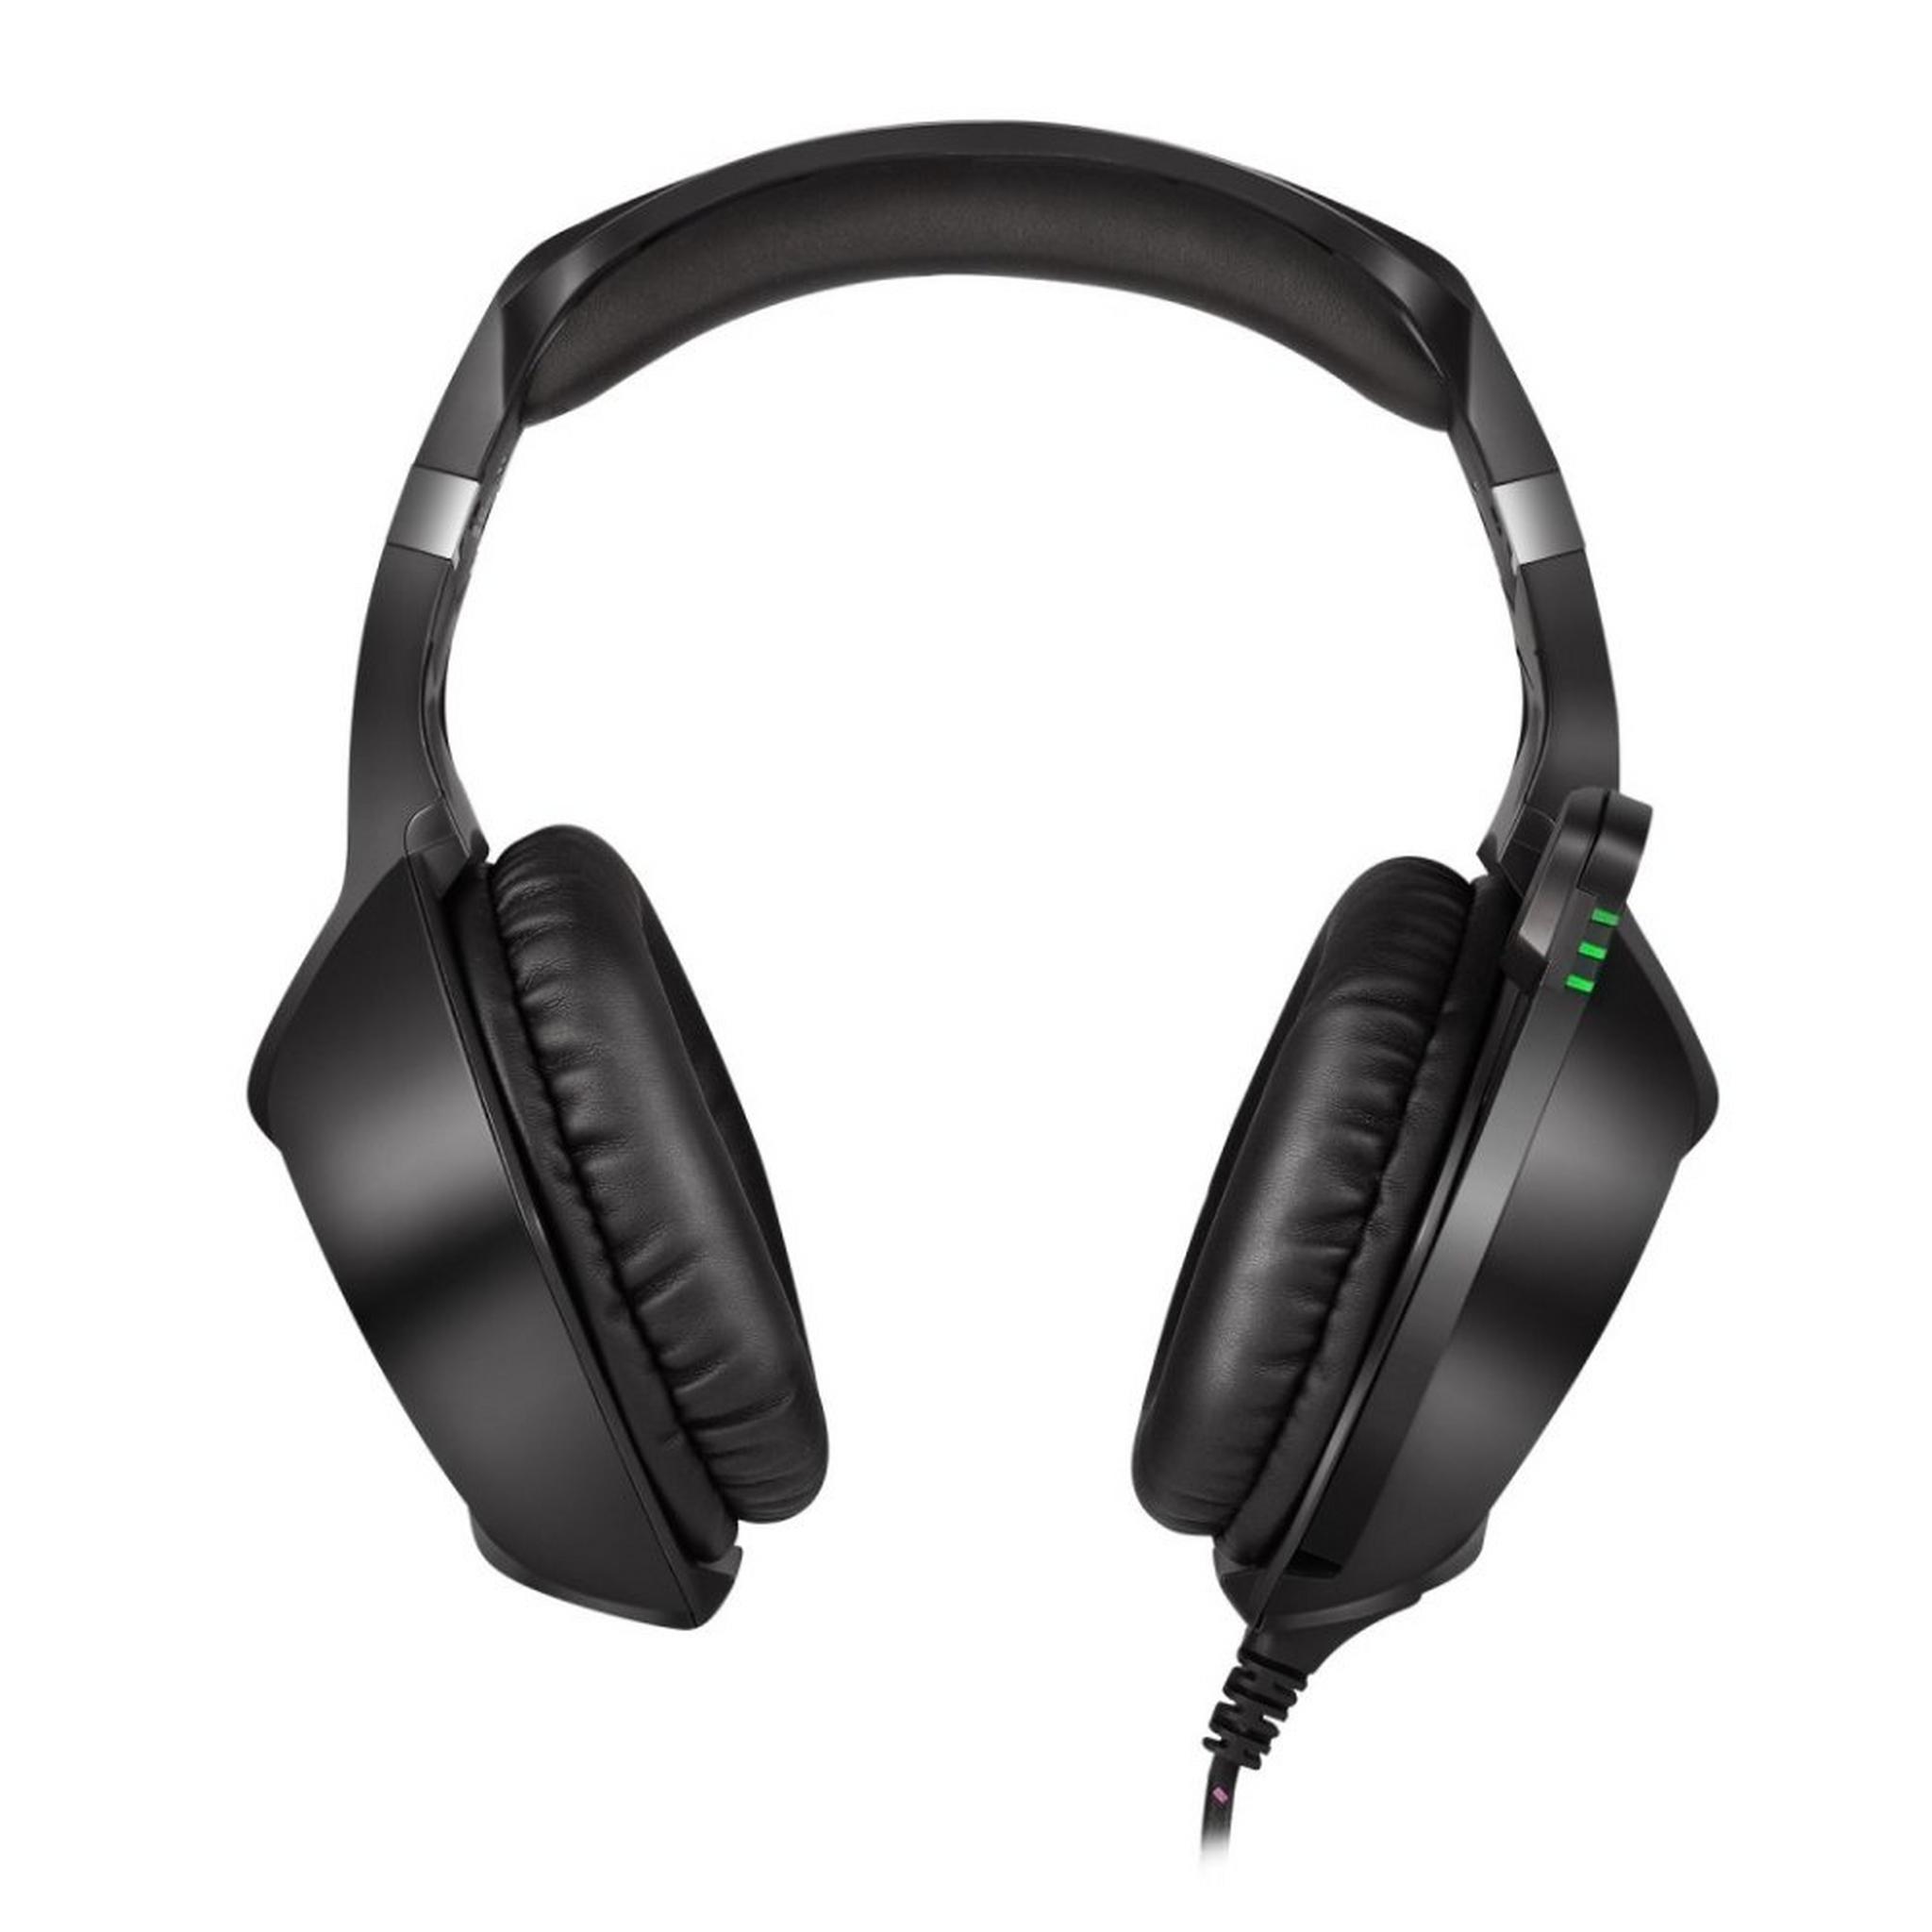 Datazone G1500 Over Ear Wired Gaming Headset for PS4 and PC - Green